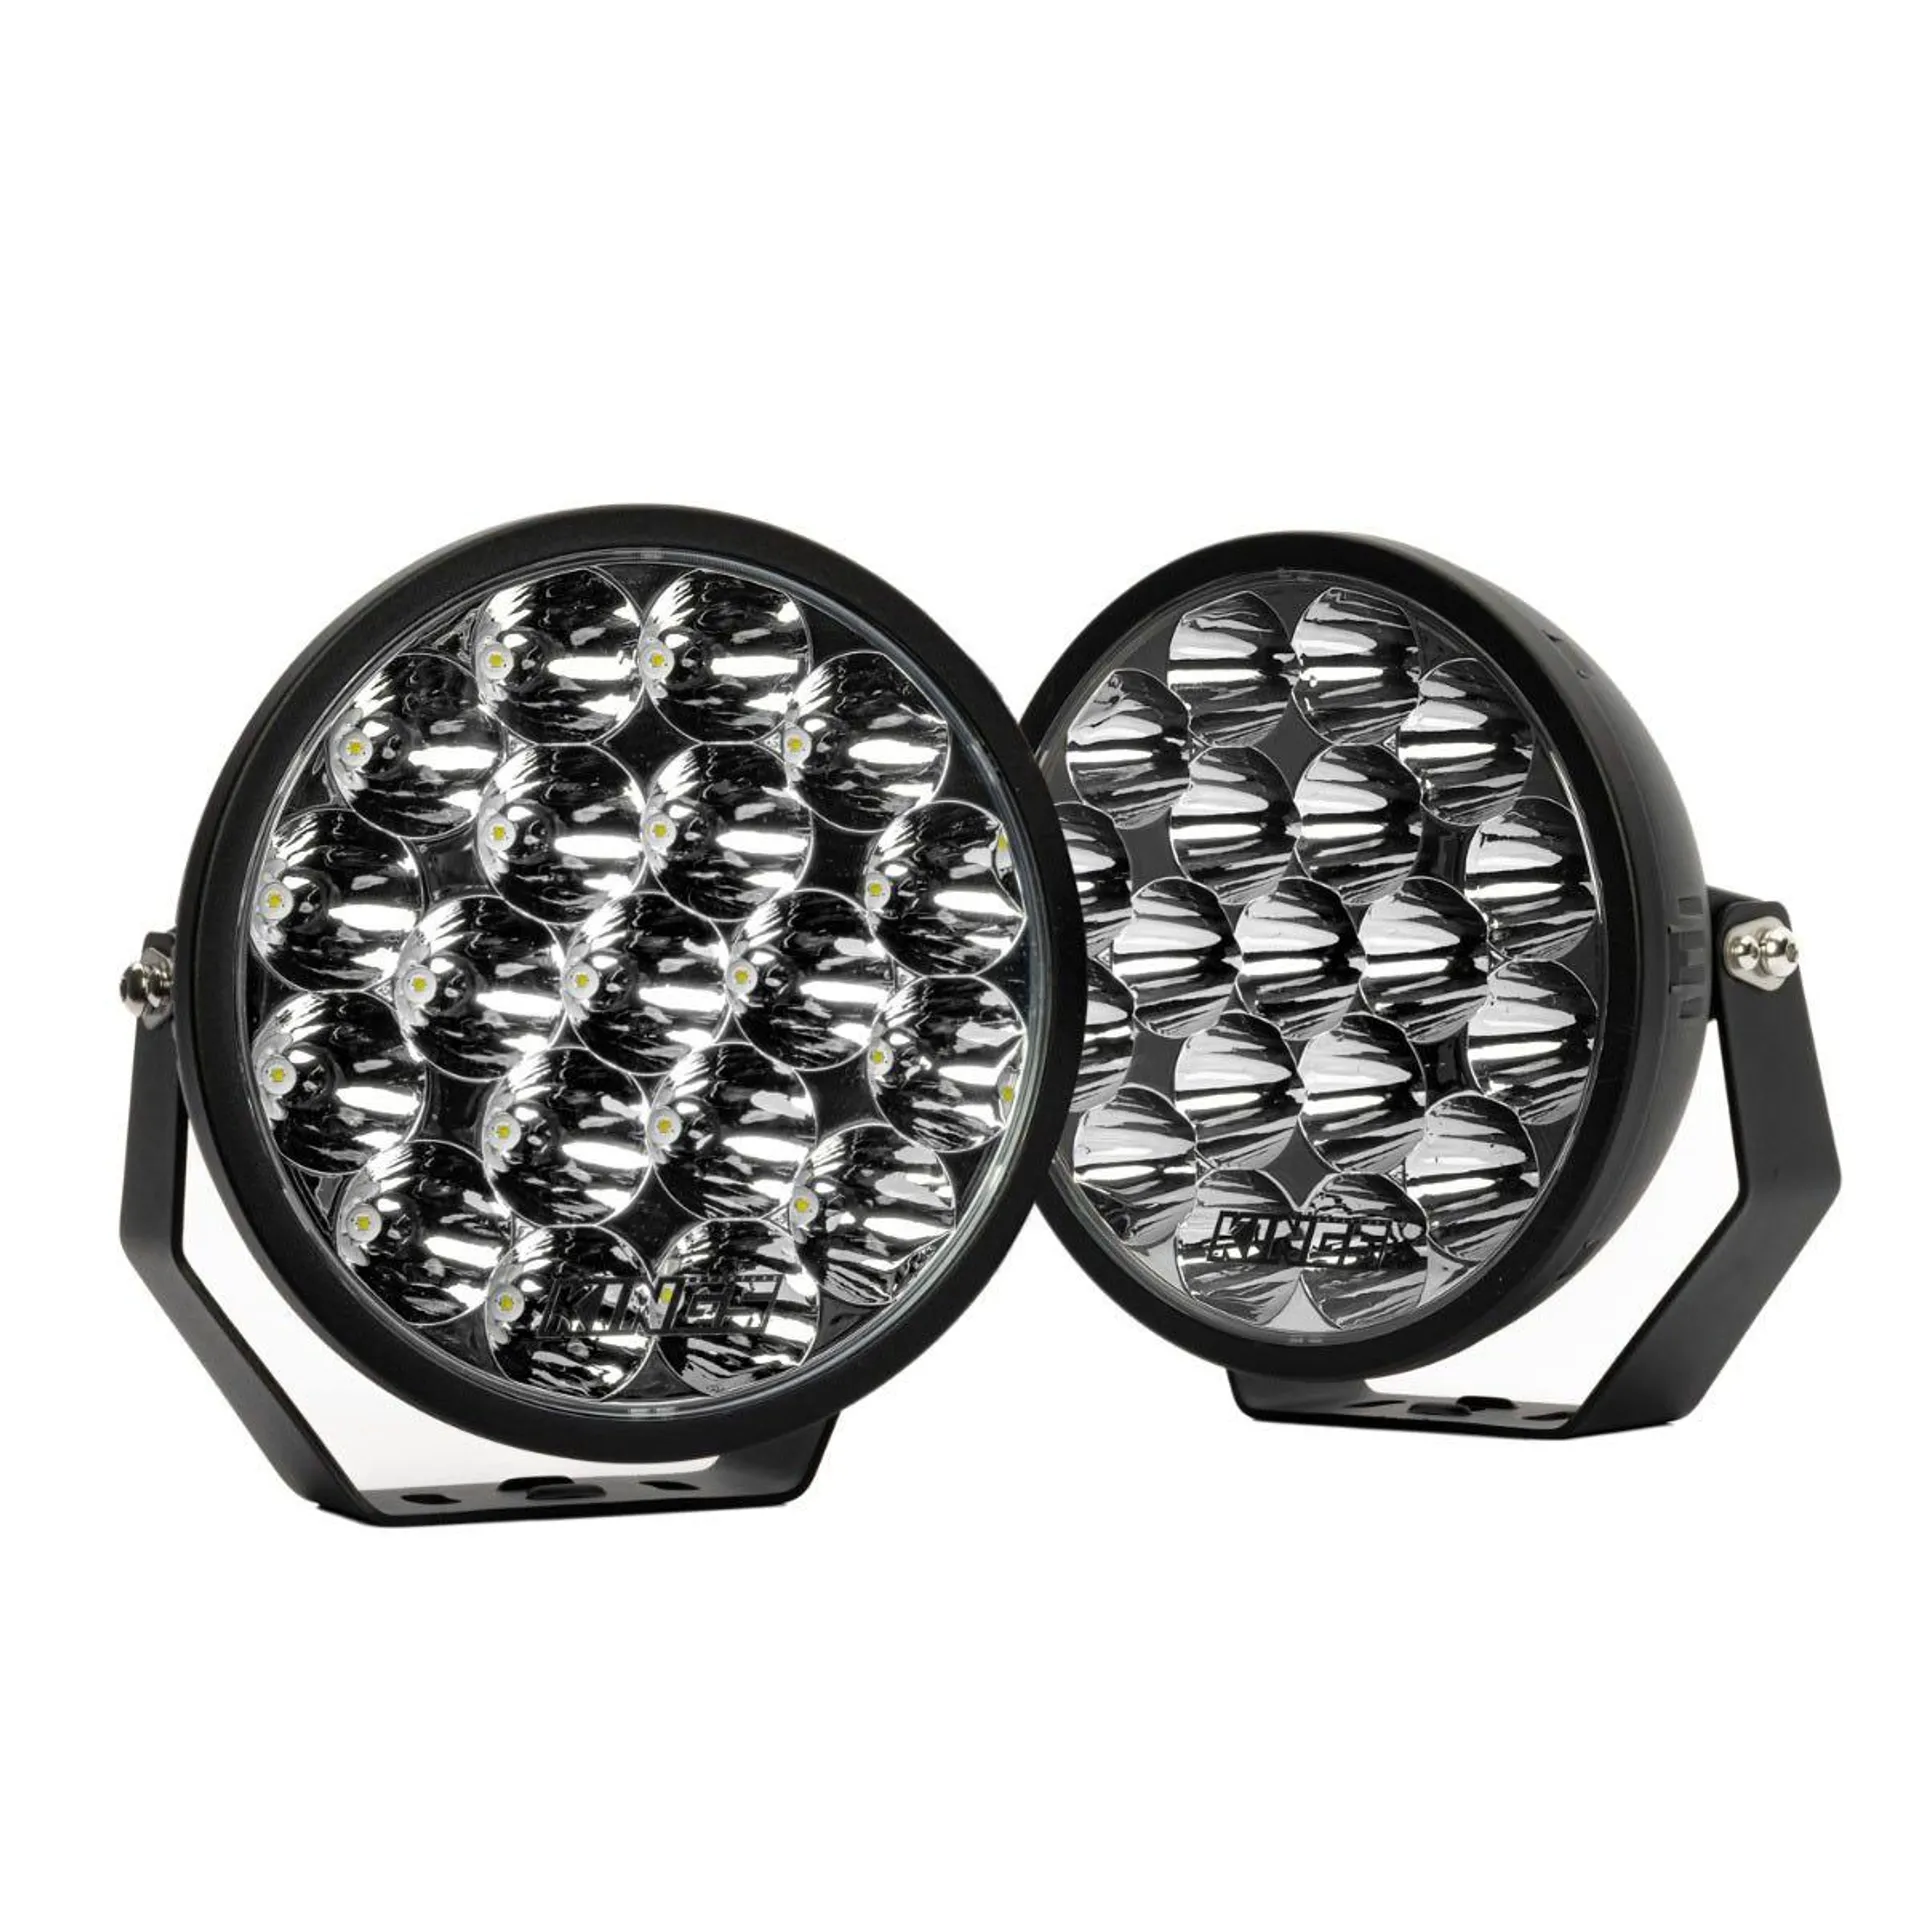 Kings 9” Illuminator LED Driving Lights (Pair) | Fitted with OSRAM LEDs | 12,616 Lumens | 1 Lux @ 1,088m